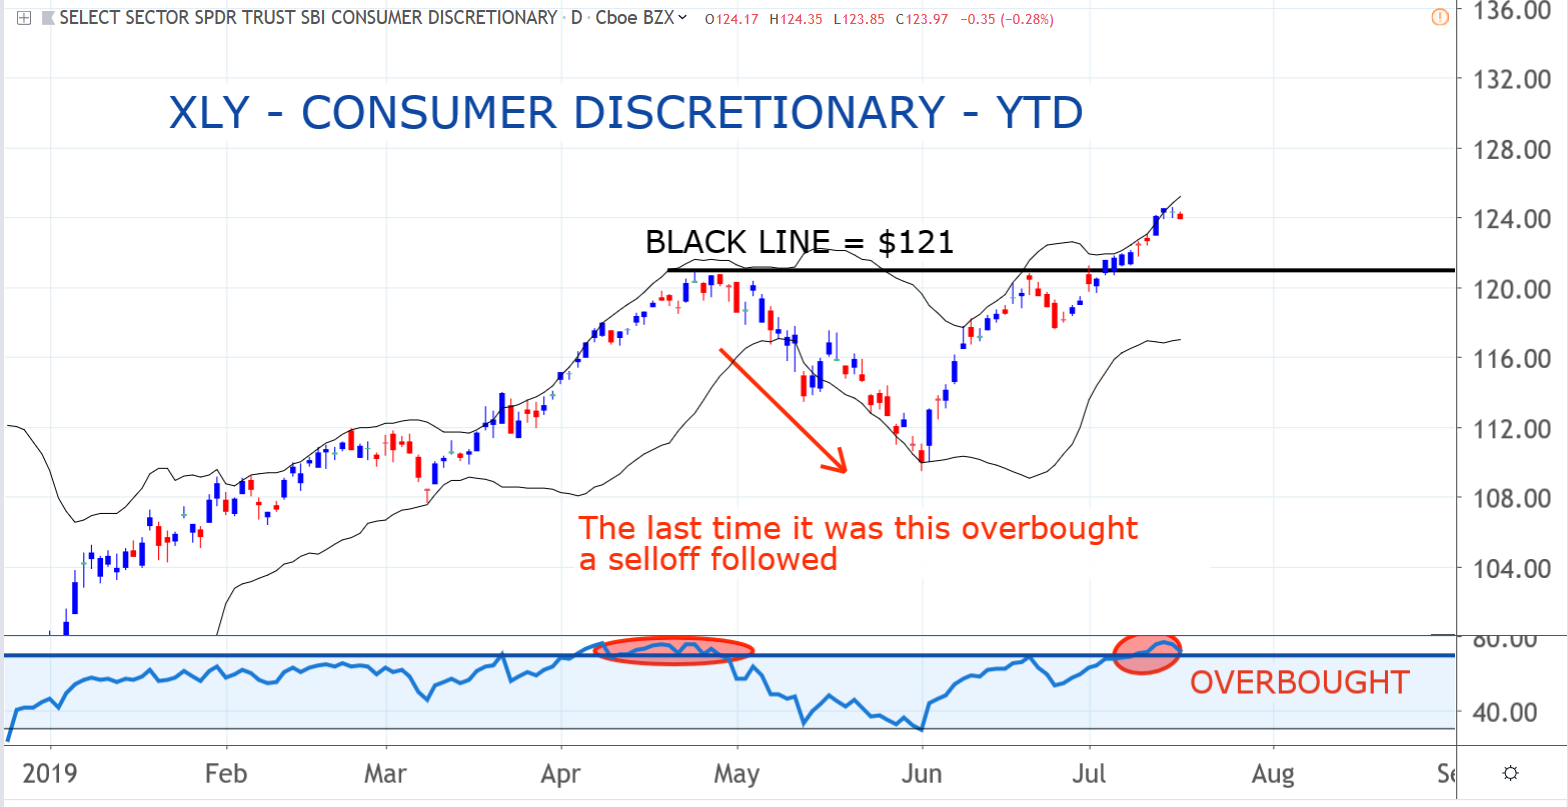 Consumer Discretionary Sector SPDR (XLY)